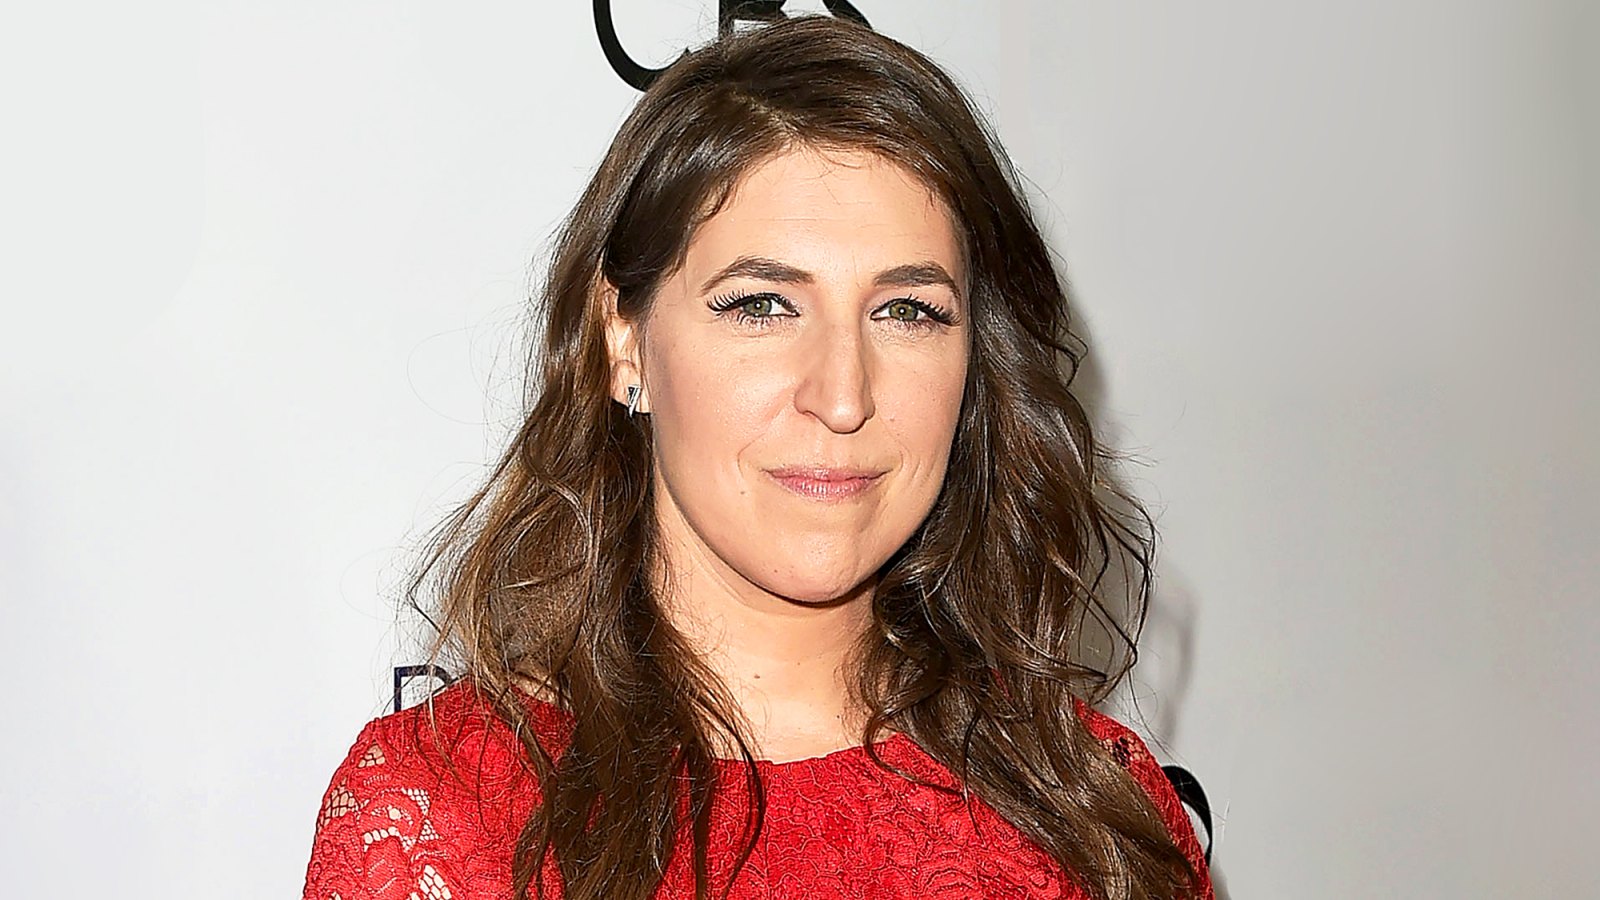 Mayim Bialik attends the People's Choice Awards 2017 at Microsoft Theater in Los Angeles, California.